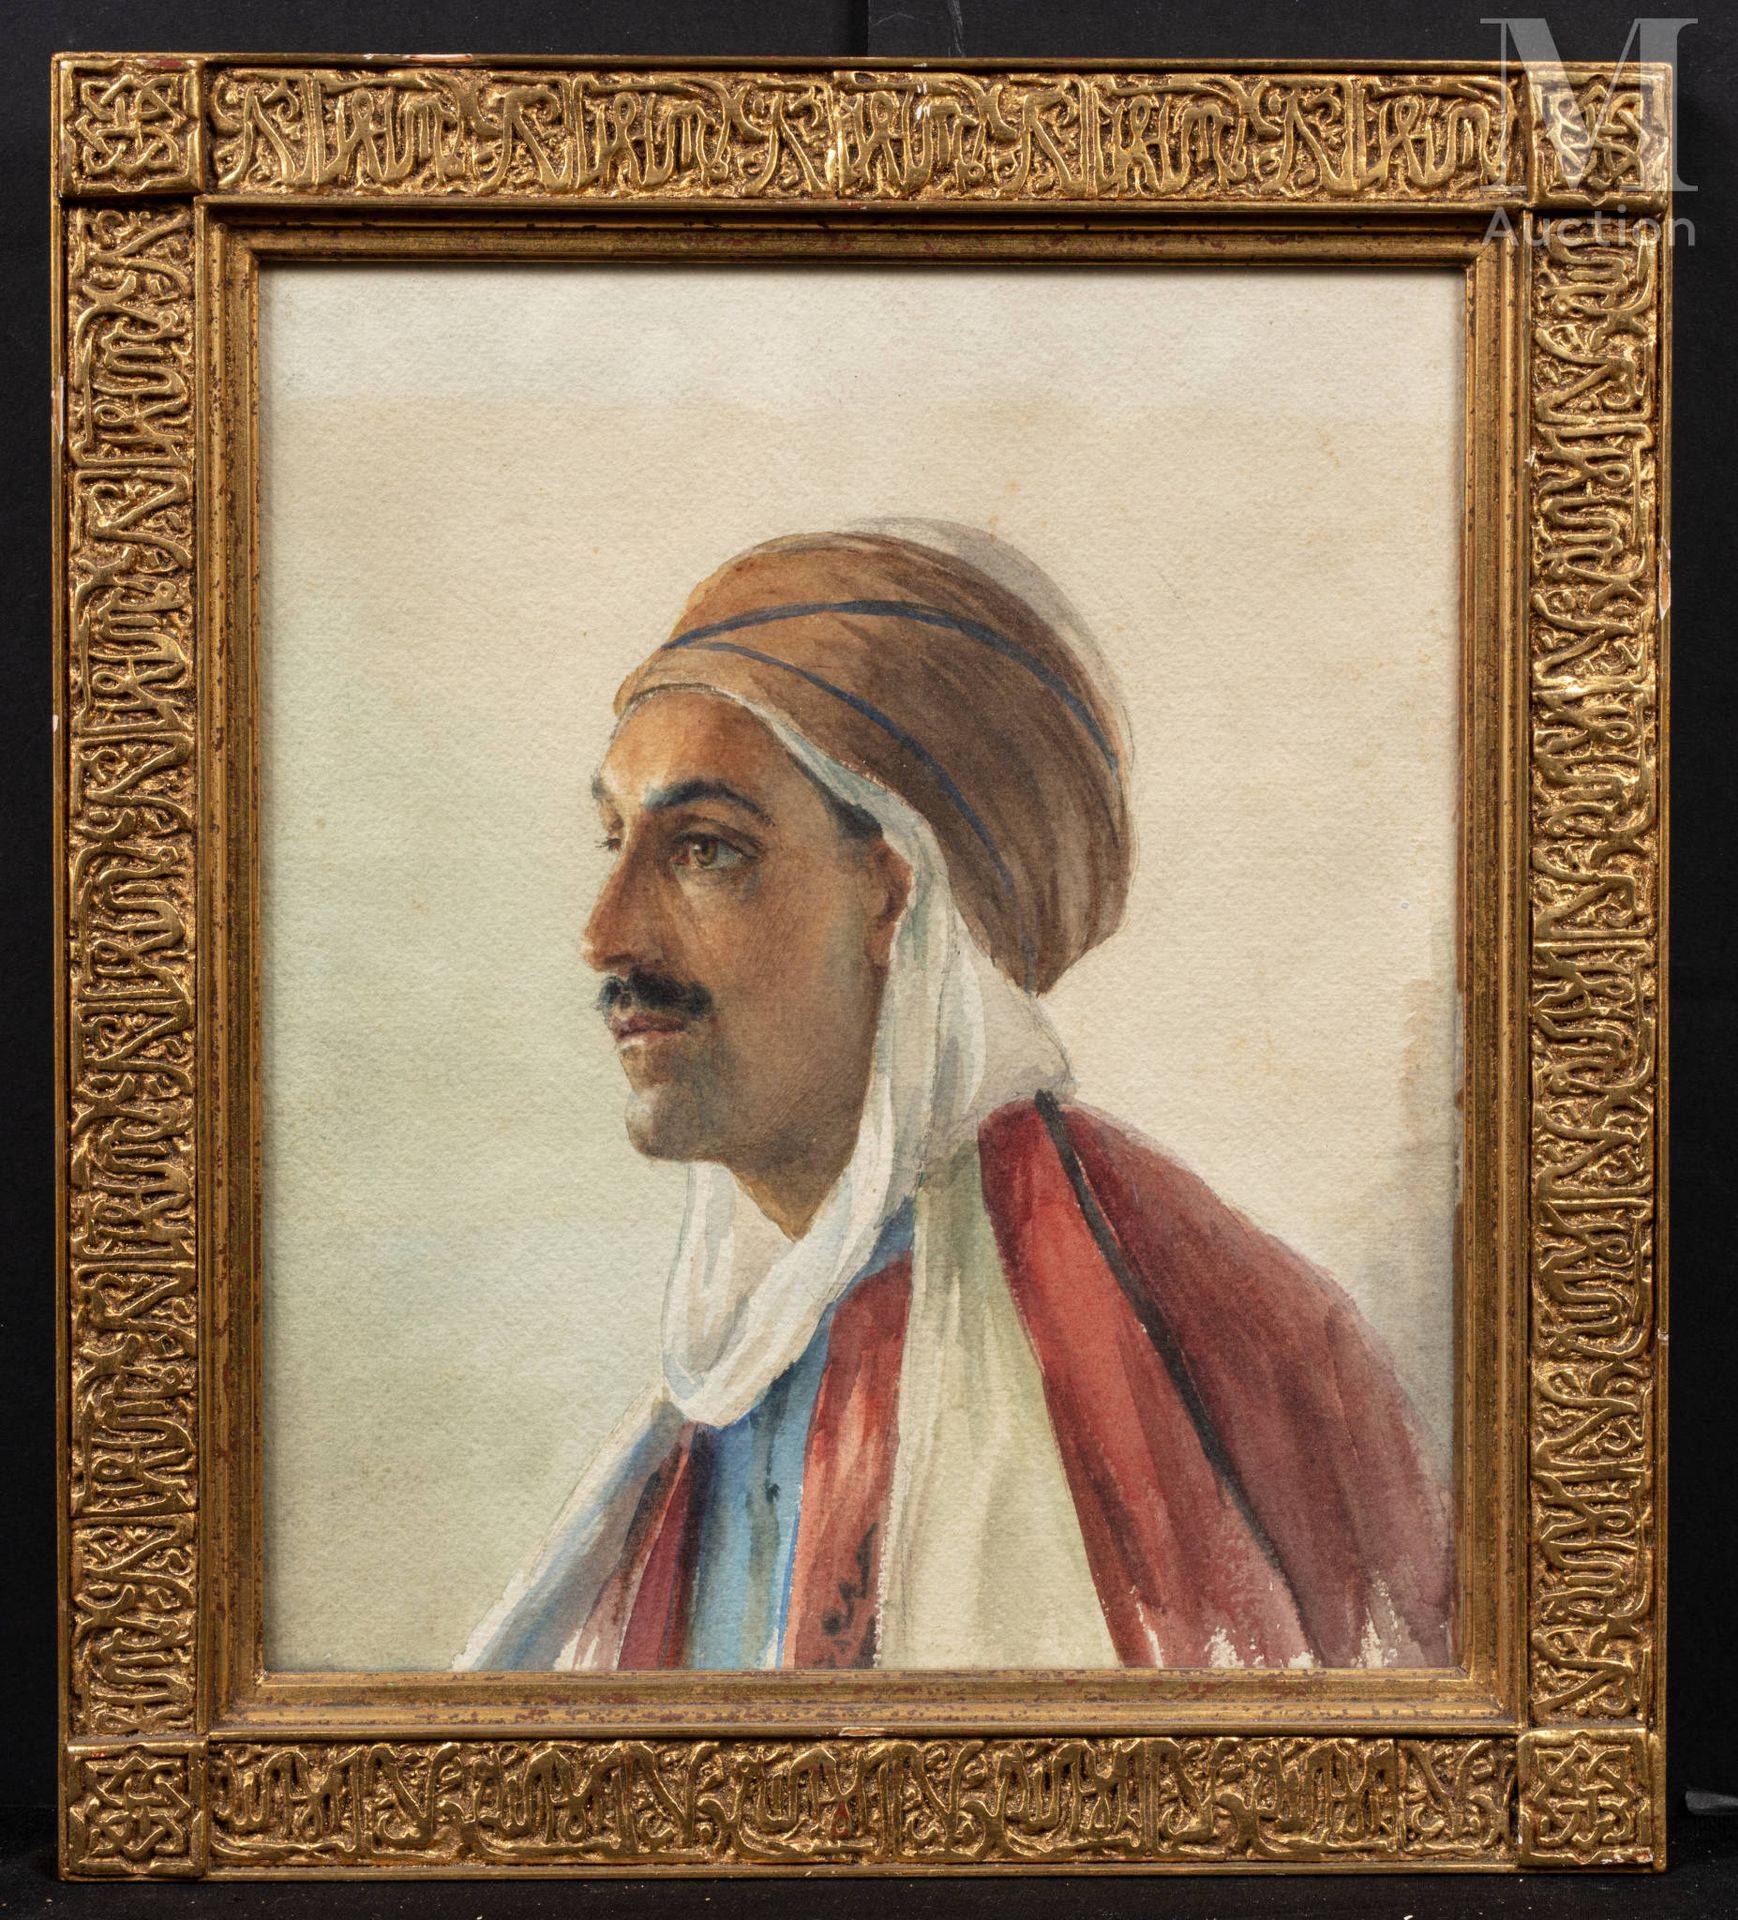 D'ANGLADE (1854 -1919) Portrait of a man with a turban

Watercolor

32 x 27 cm 
&hellip;